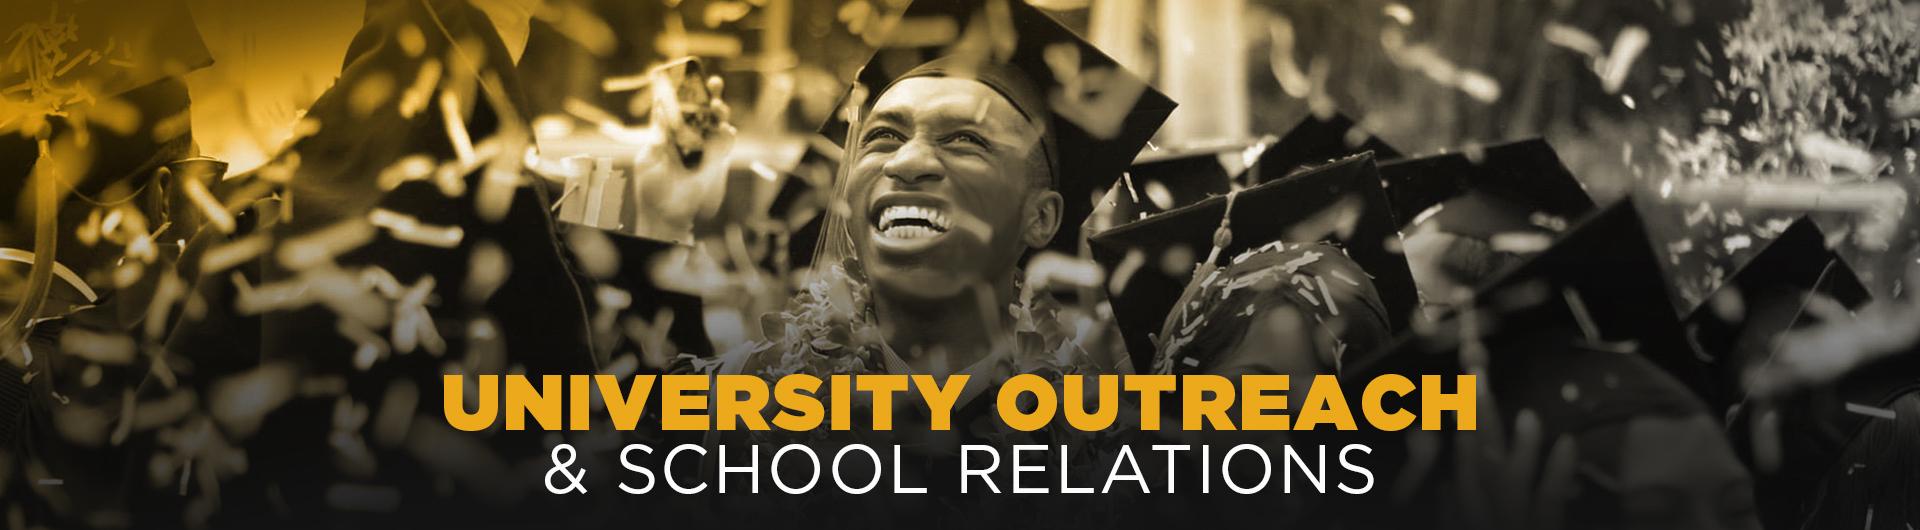 Banner for University Outreach & School Relations